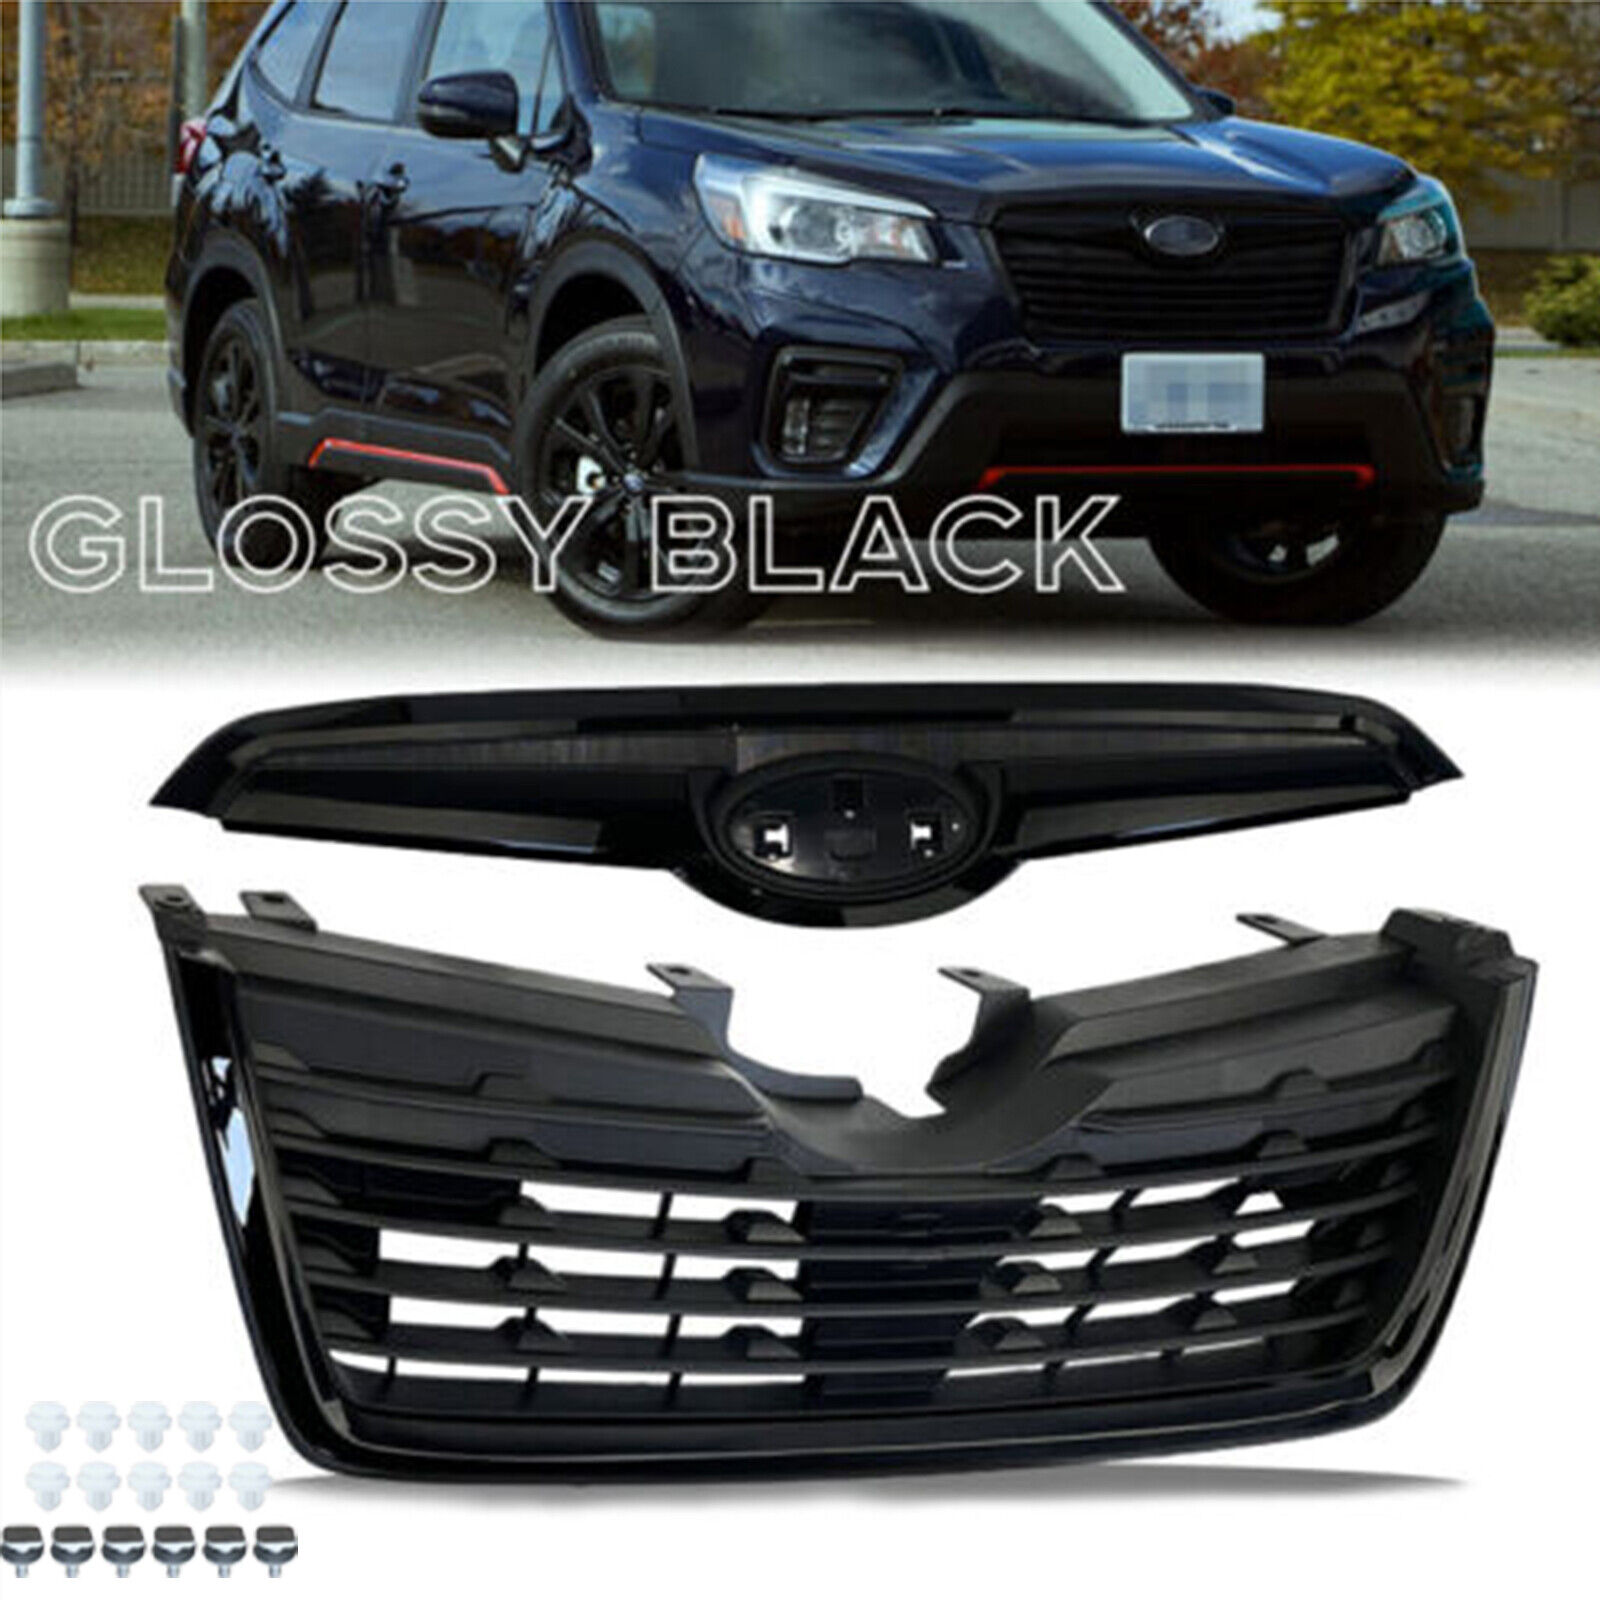 Glossy Black Front Bumper Upper Grille Fits 2019 2020 2021 Subaru Forester Grill